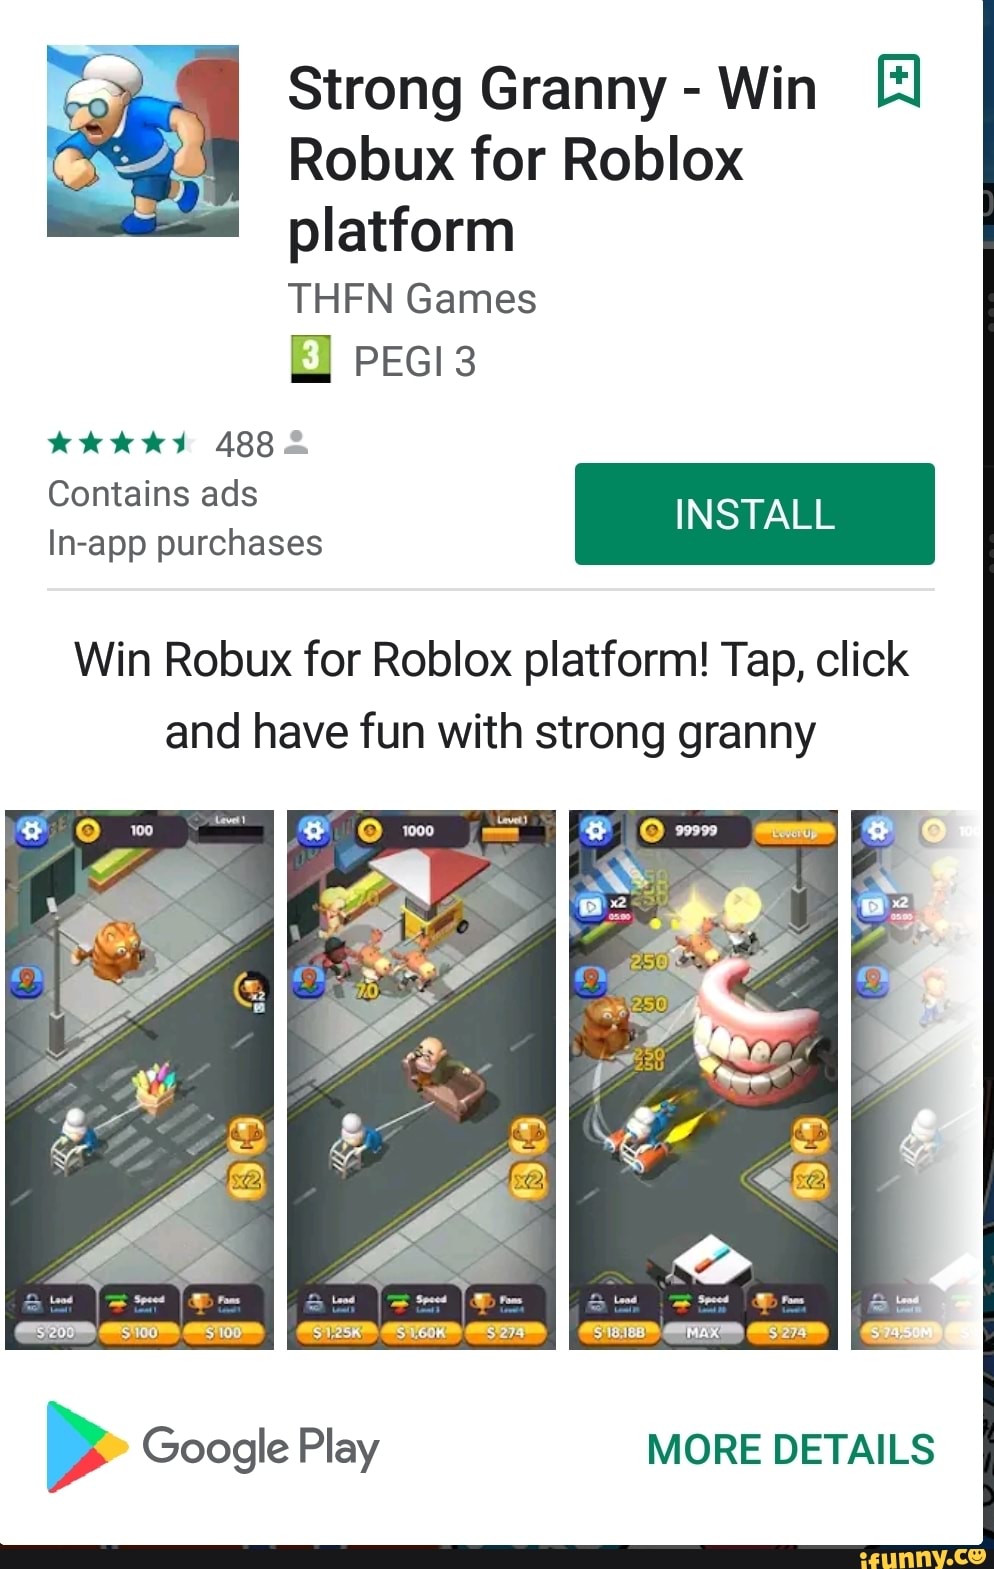 Strong Granny Win El Platform Thfn Games Contains Ads Install In App Purchases Win Robux For Roblox Platform Tap Click And Have Fun With Strong Granny Ifunny - strong granny win robux for roblox platform